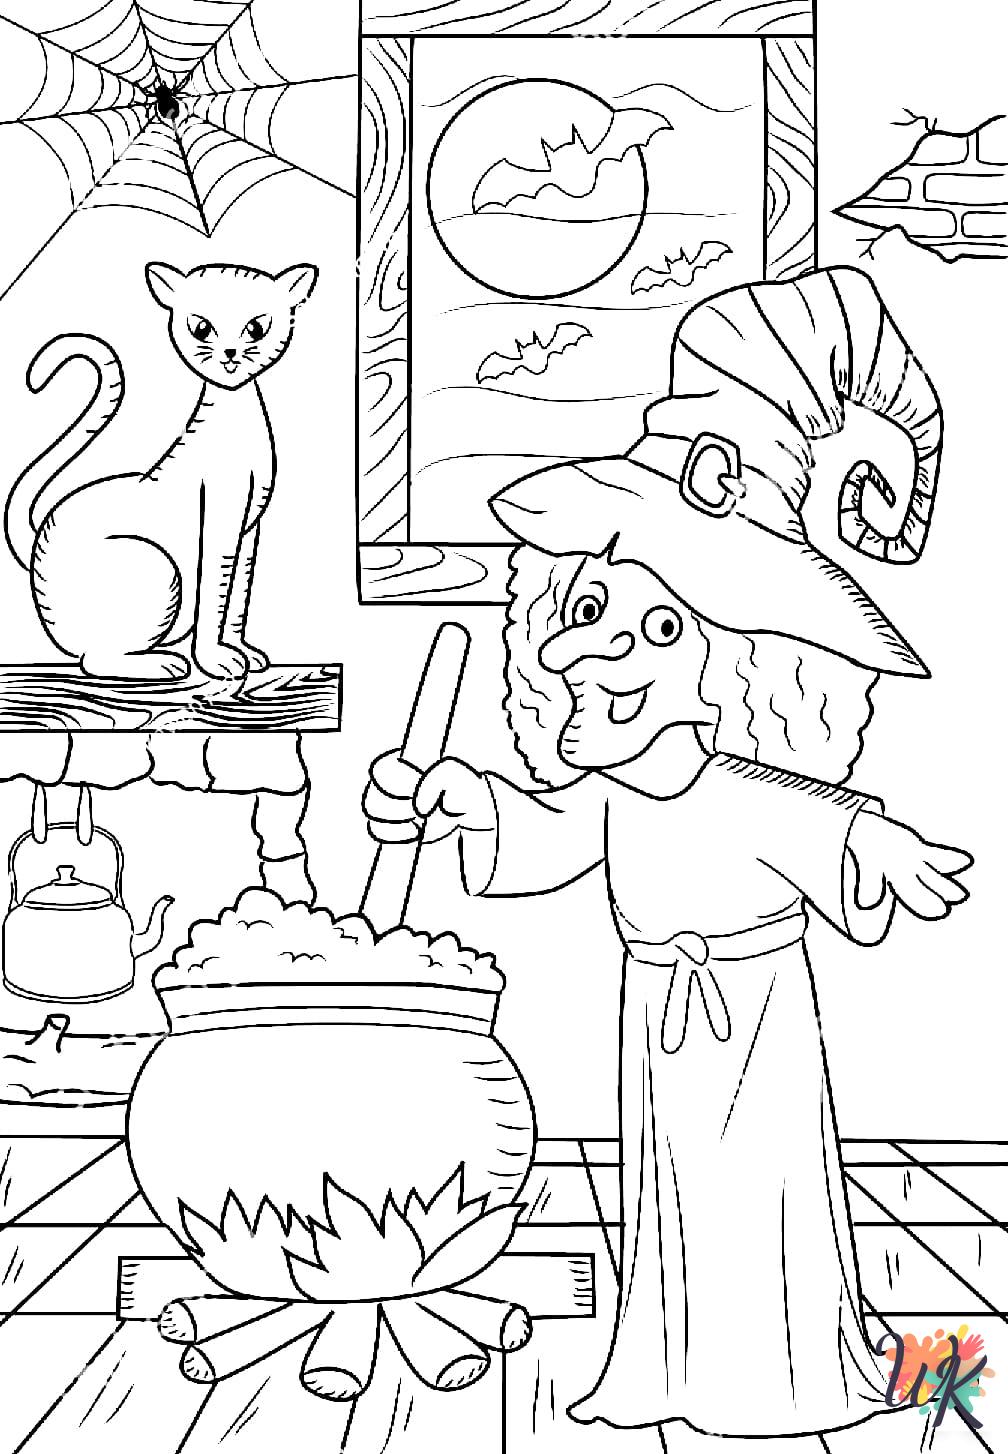 Witch coloring pages free printable